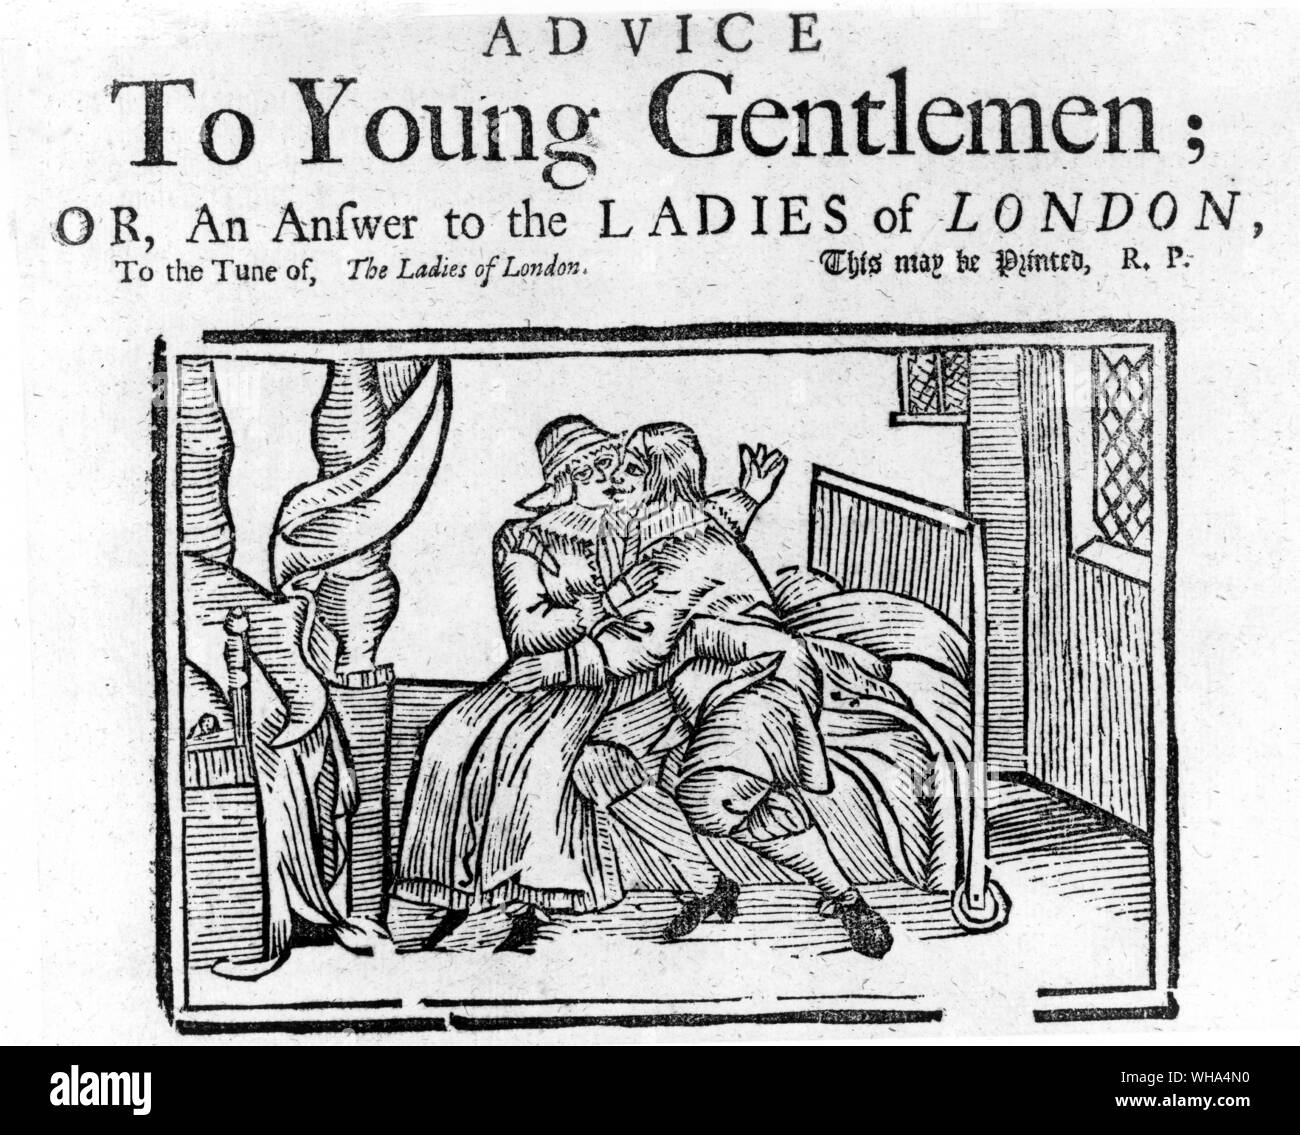 From 'Advice to Young Gentleman', a broadsheet ballad - or An Answer to the Ladies of London. Taken from Pepys, Samuel English diarist and naval administrator; kept diary 1660-1669 (published 1893-1899); president of Royal Society 1684-1686  1633-1703 Stock Photo